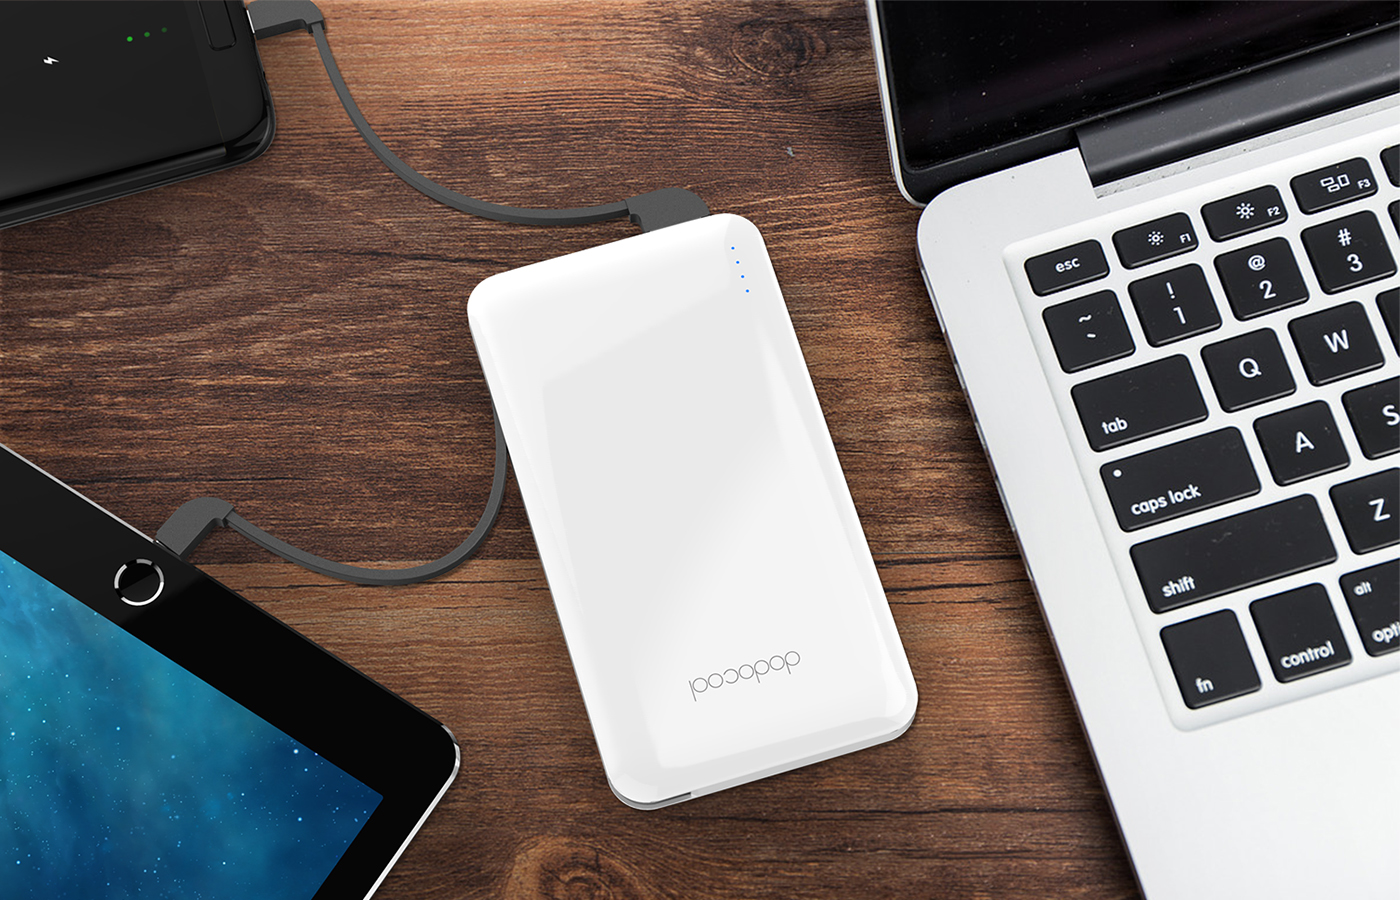 $3 OFF Mfi 10000 mAh 2-Port Power Bank,free shipping $21.99(Code:DP103) from TOMTOP Technology Co., Ltd